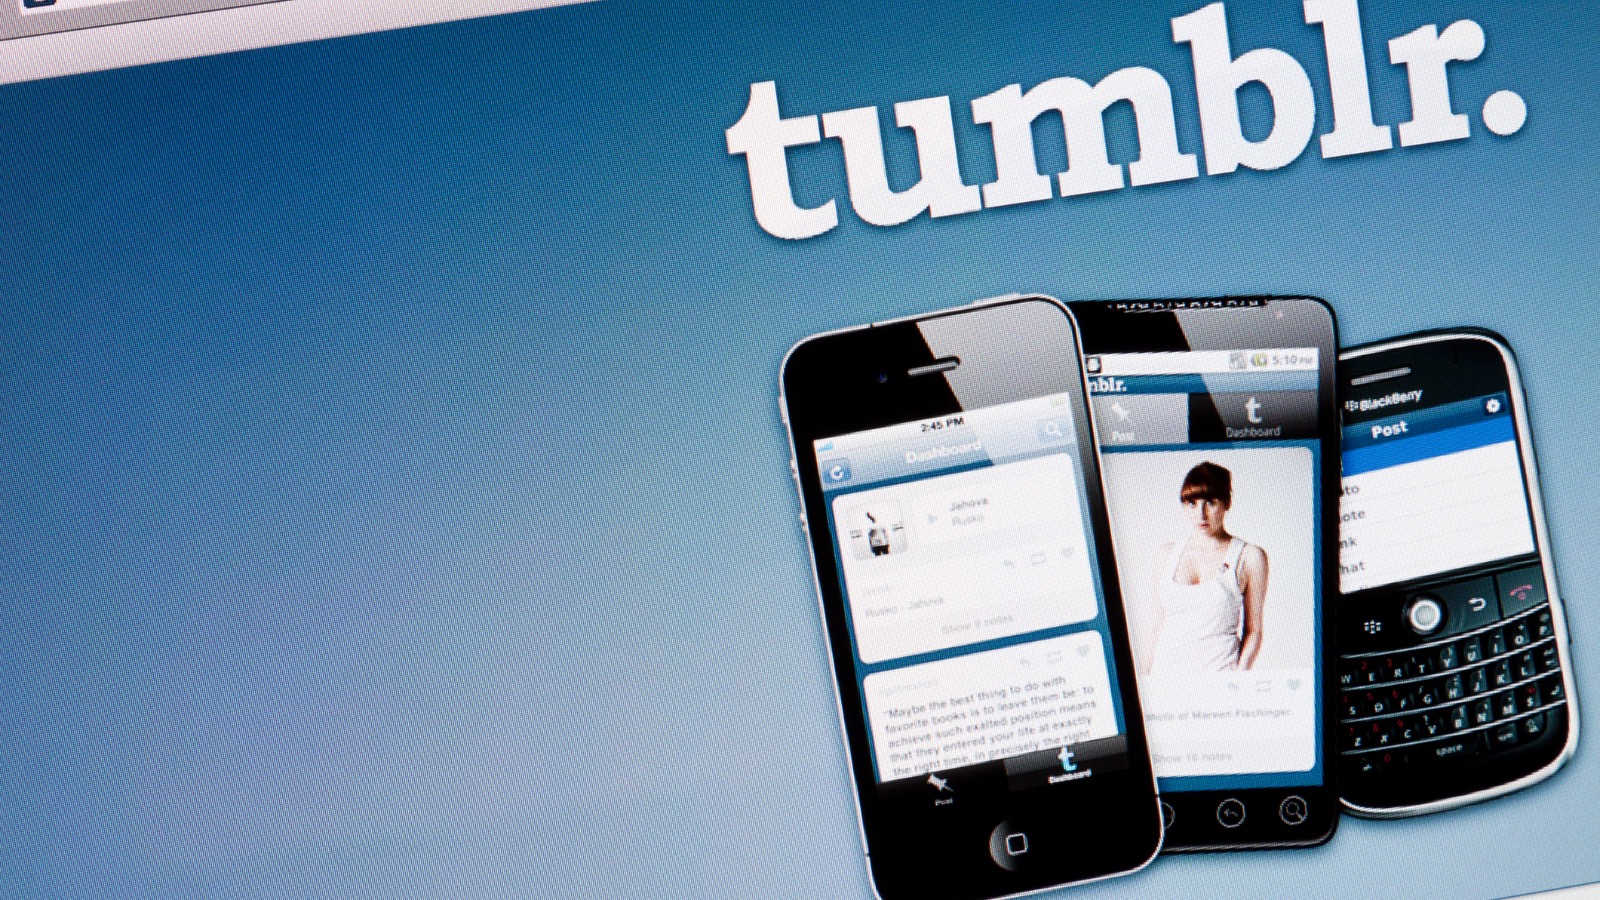 Tumblr Removed From iOS App Store Over Child Porn Concerns